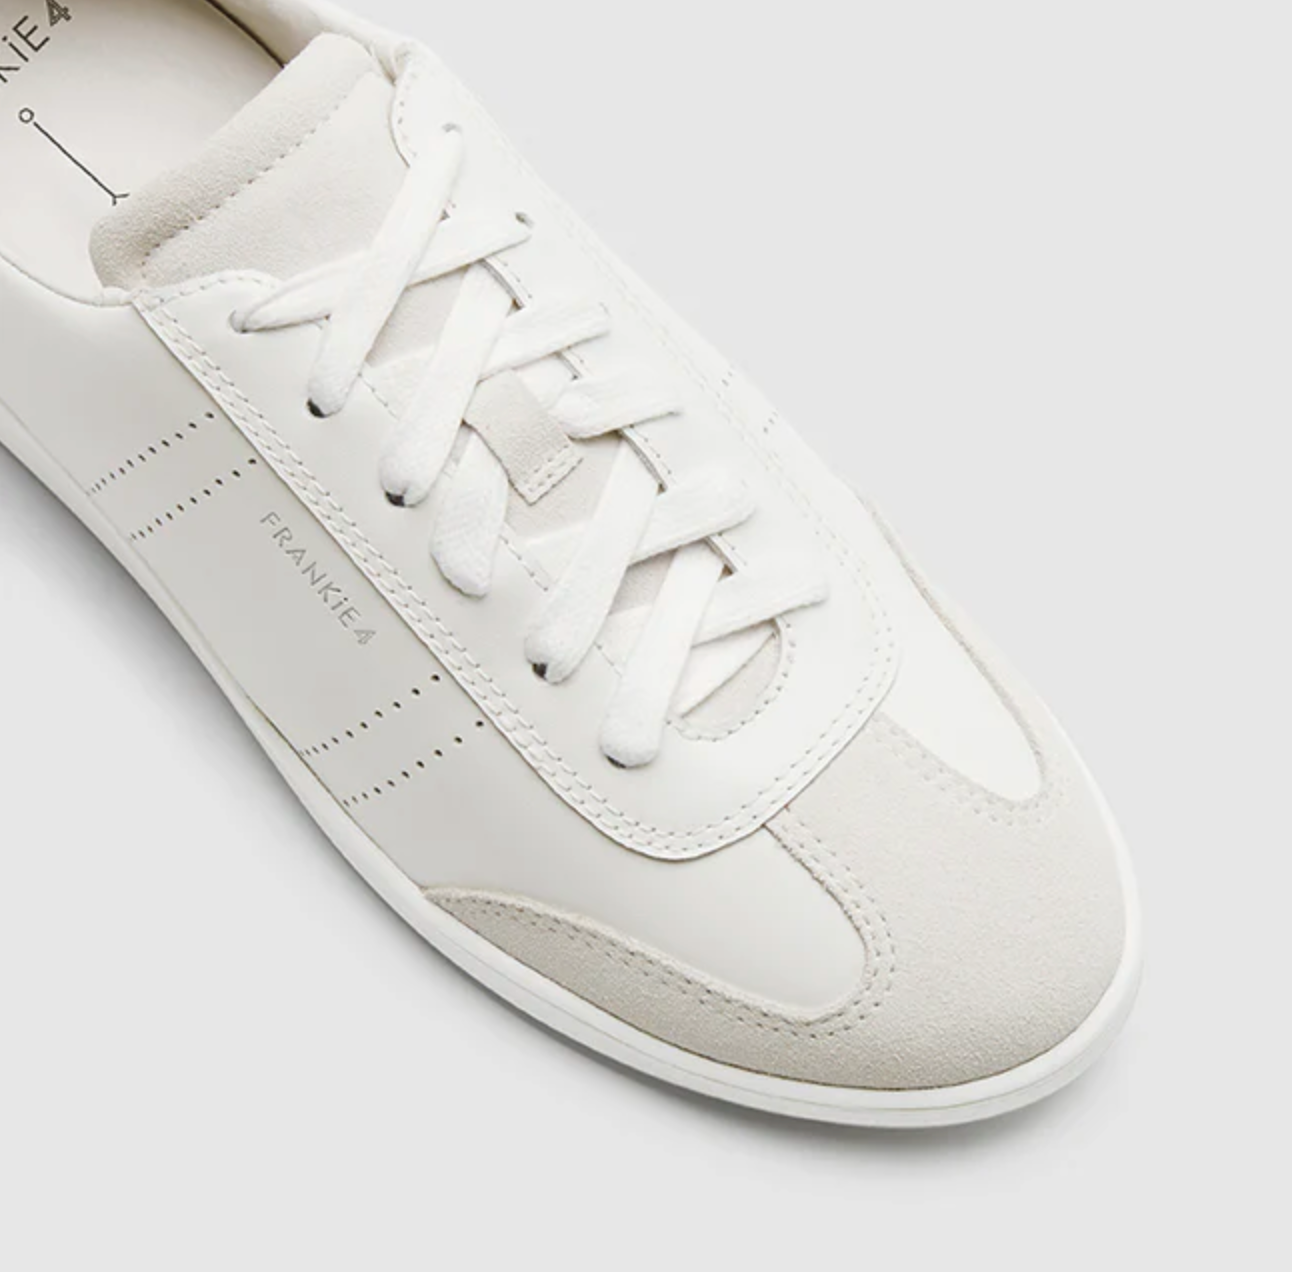 FRANKIE4 DREW WHITE SCARLET - Women sneakers - Collective Shoes 